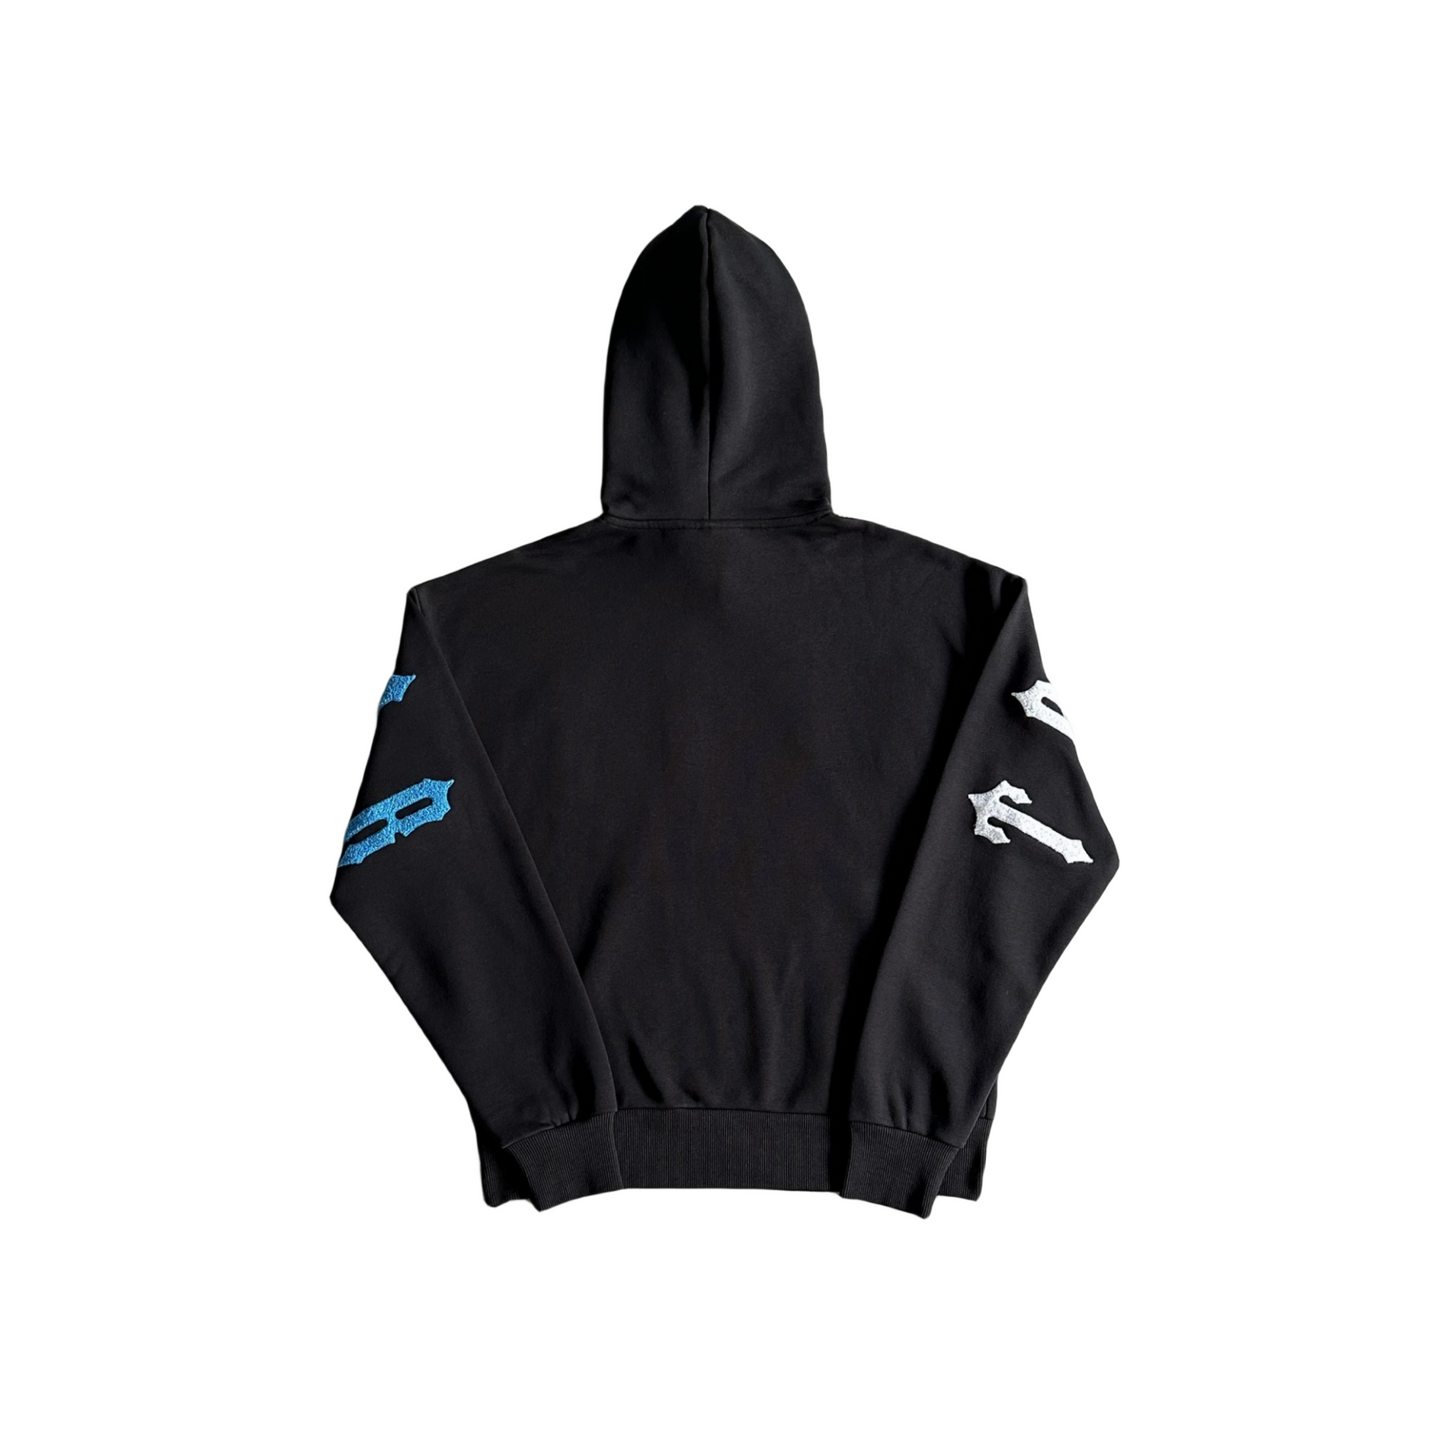 Trapstar Irongate Arch Chenille Hoodie-Black/gradient blue